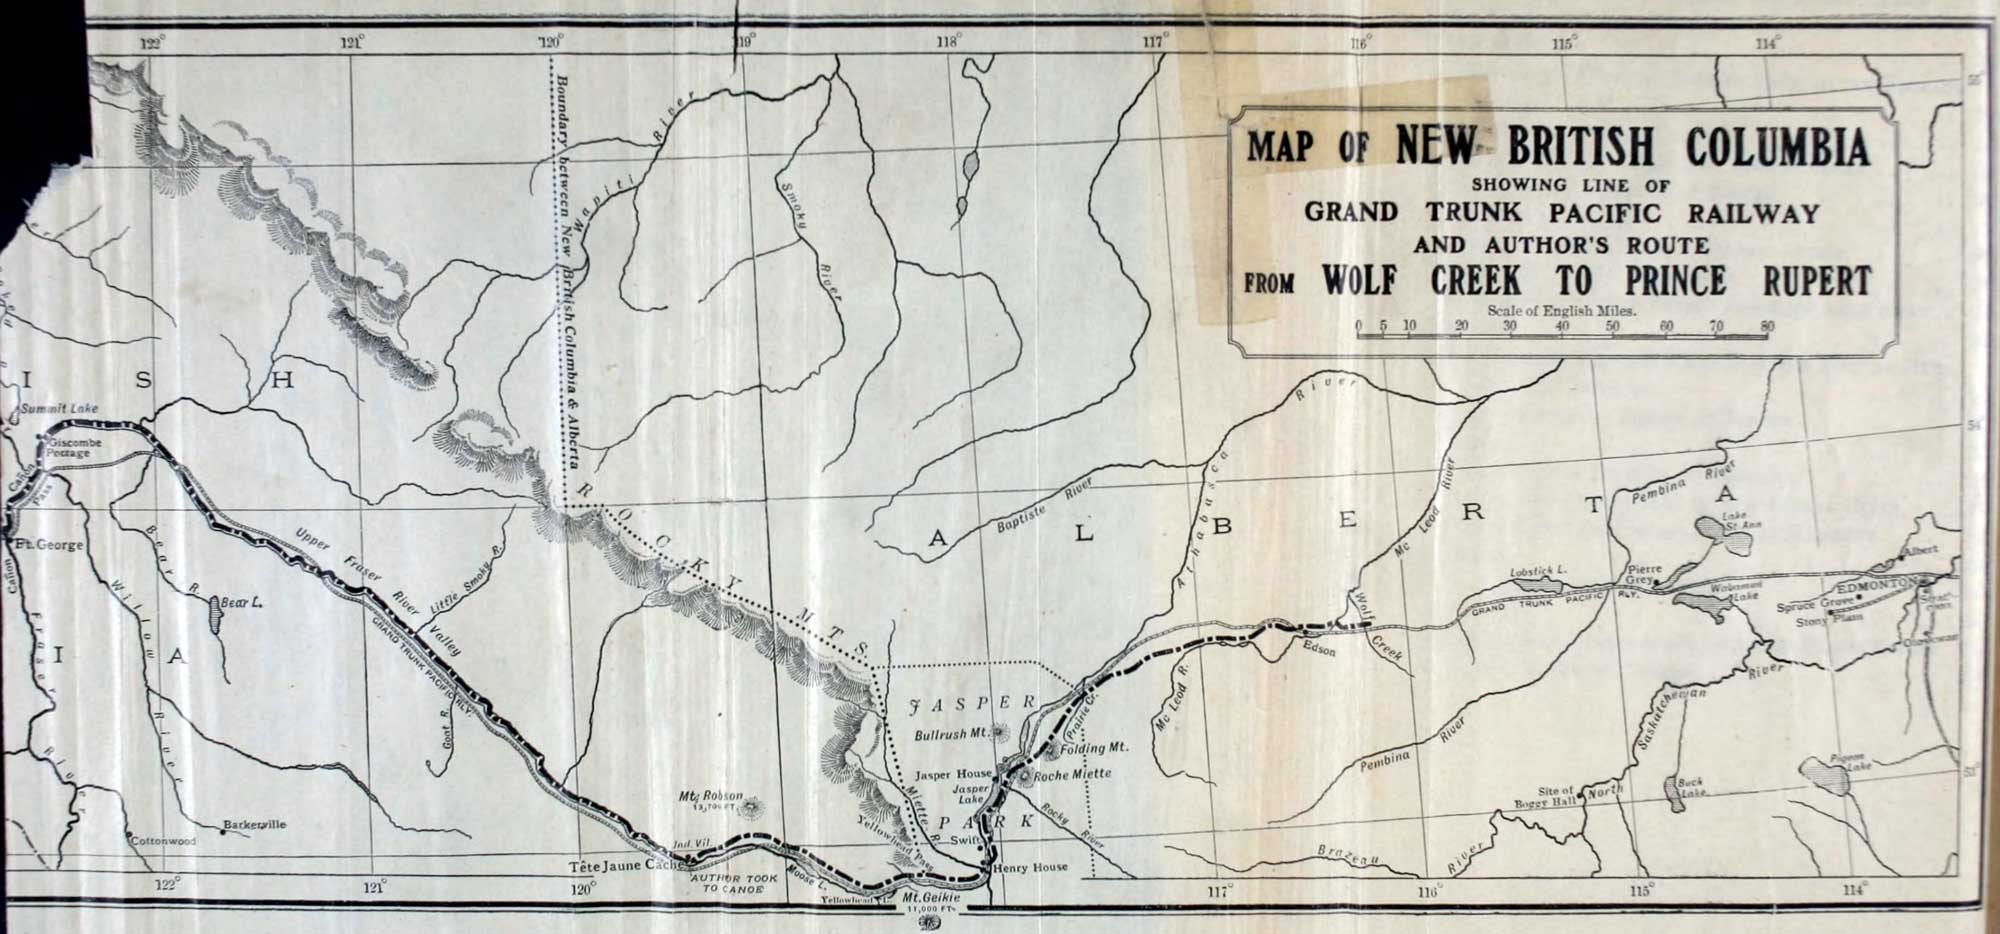 Map of New British Columbia
Showing Line of Grand Trunk Pacific Railway and Author's Route From Wolf Creek to Prince Rupert